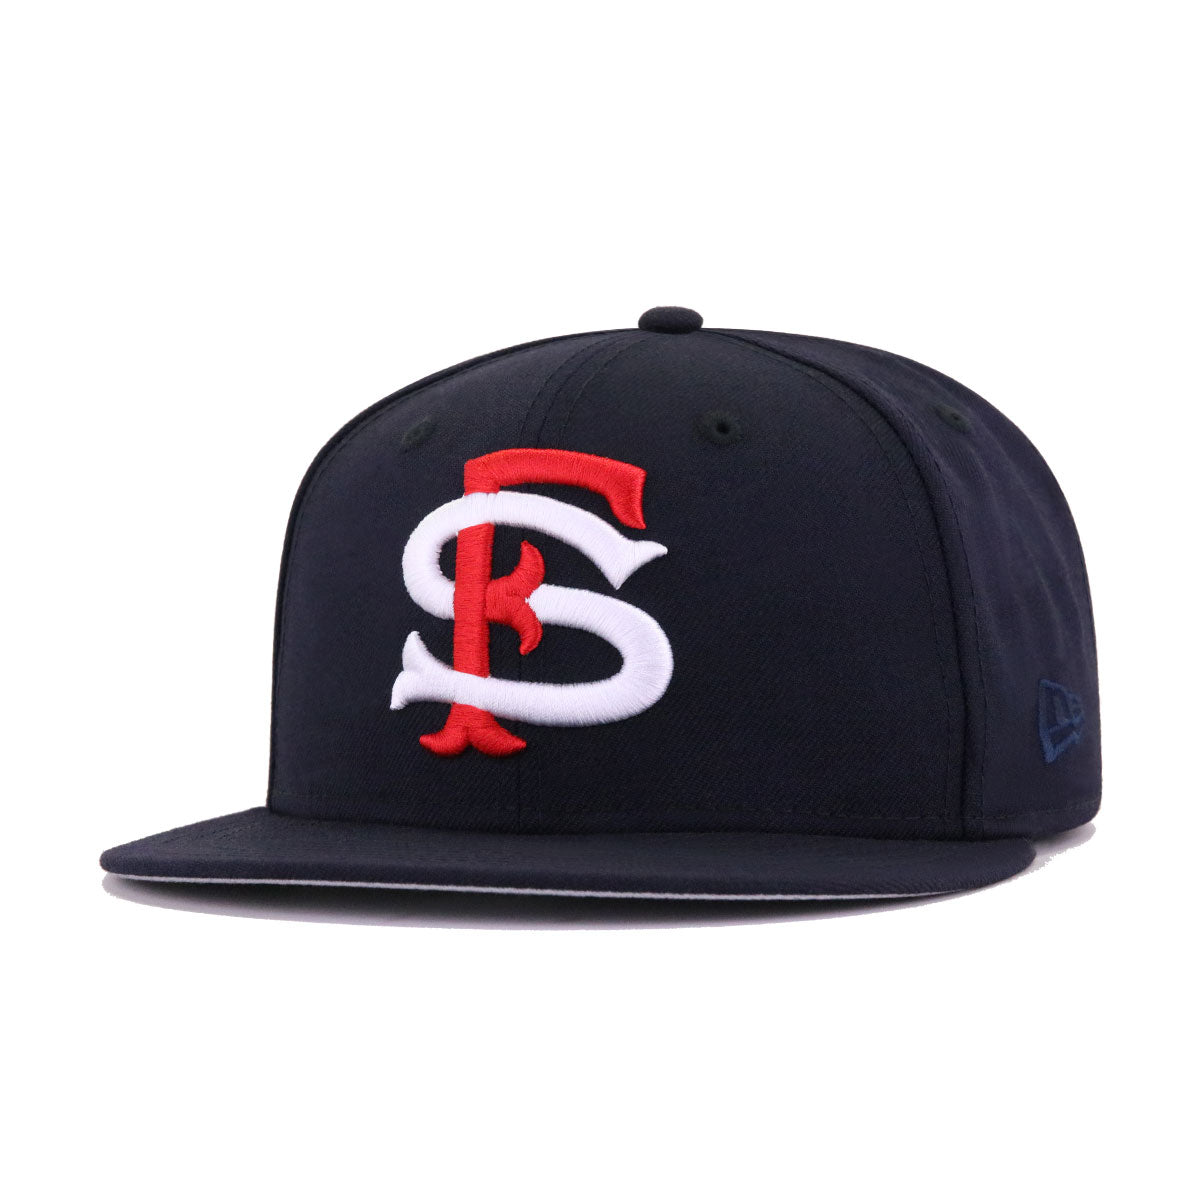 San Francisco Seals Fitted Hat Baseball Cap SF 49ers